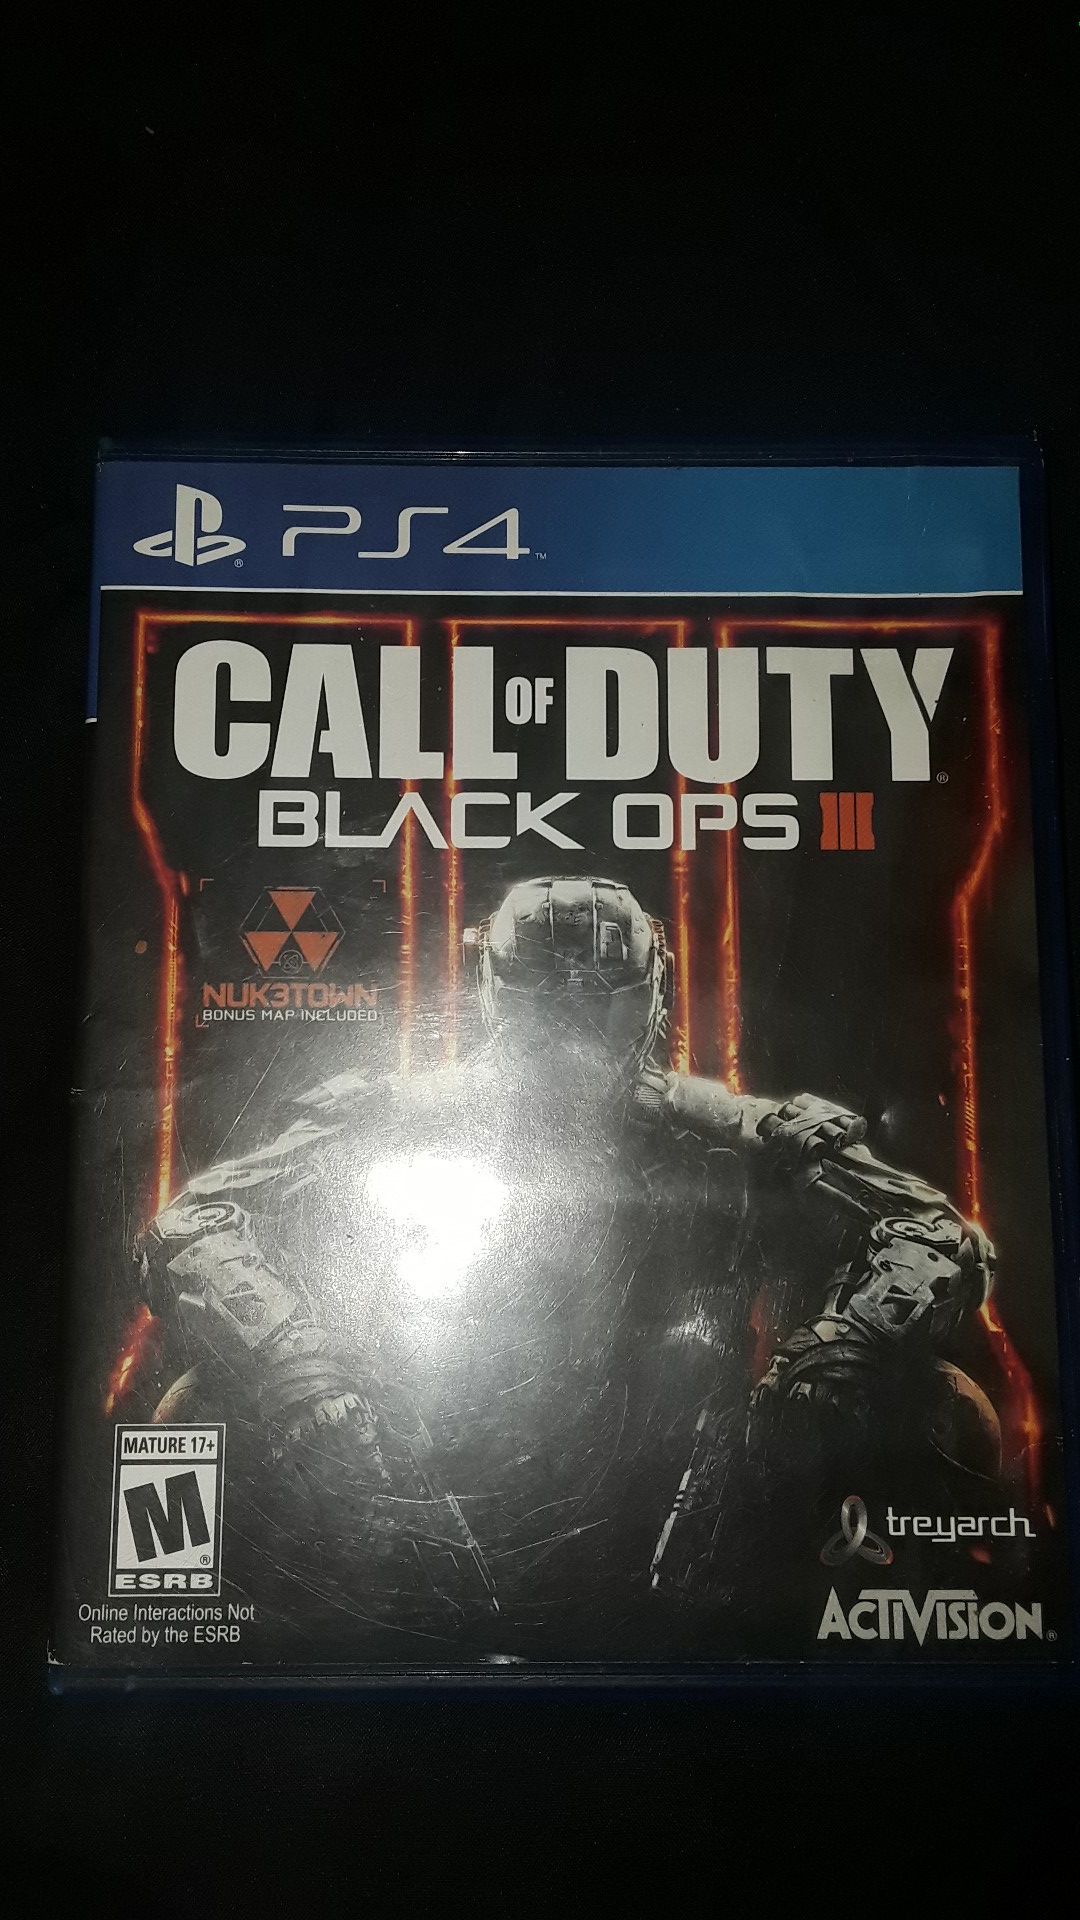 Black ops 3 call of duty